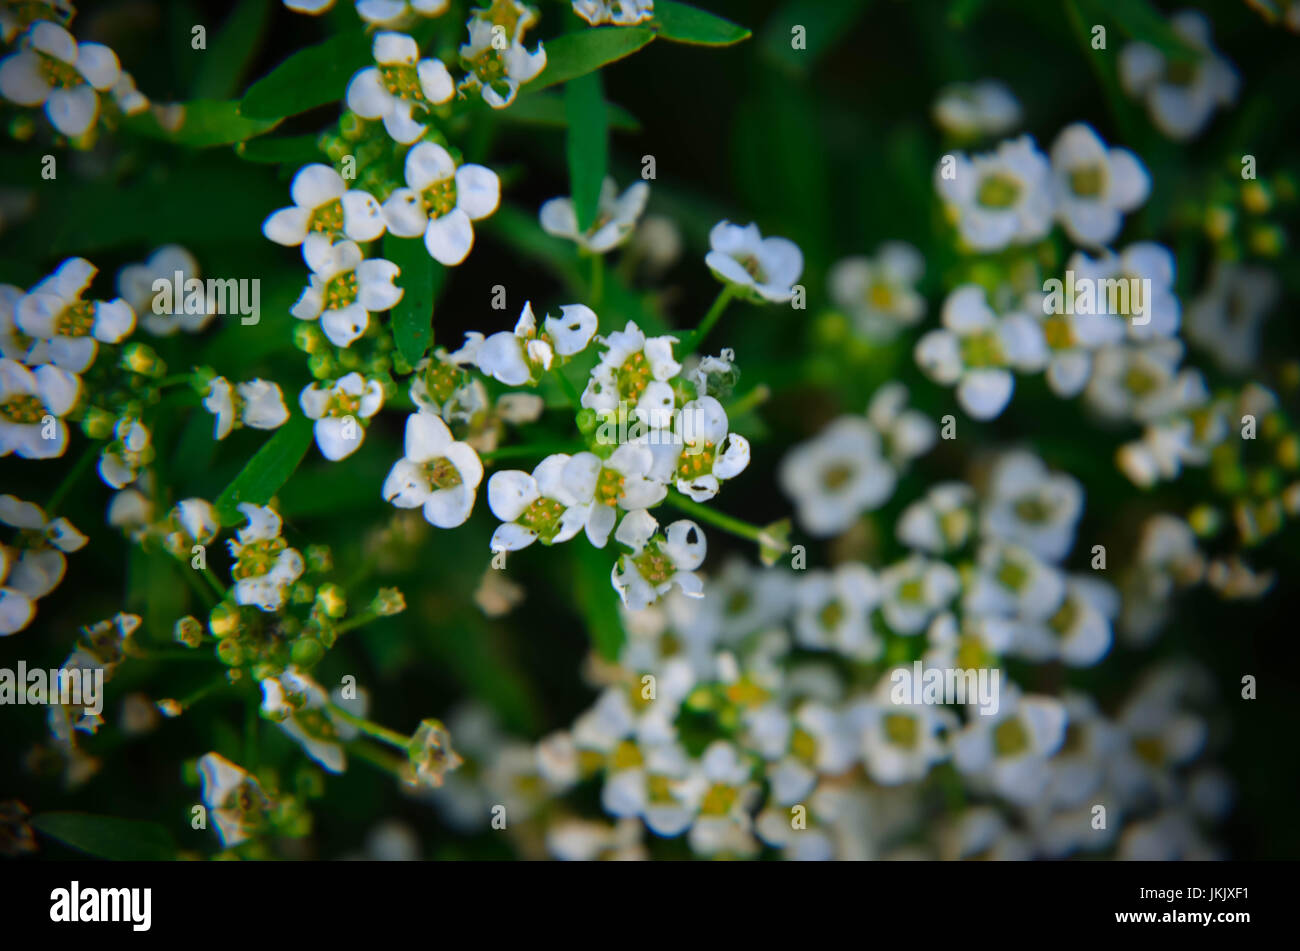 Nature background with little white flowers and sun beams Stock Photo